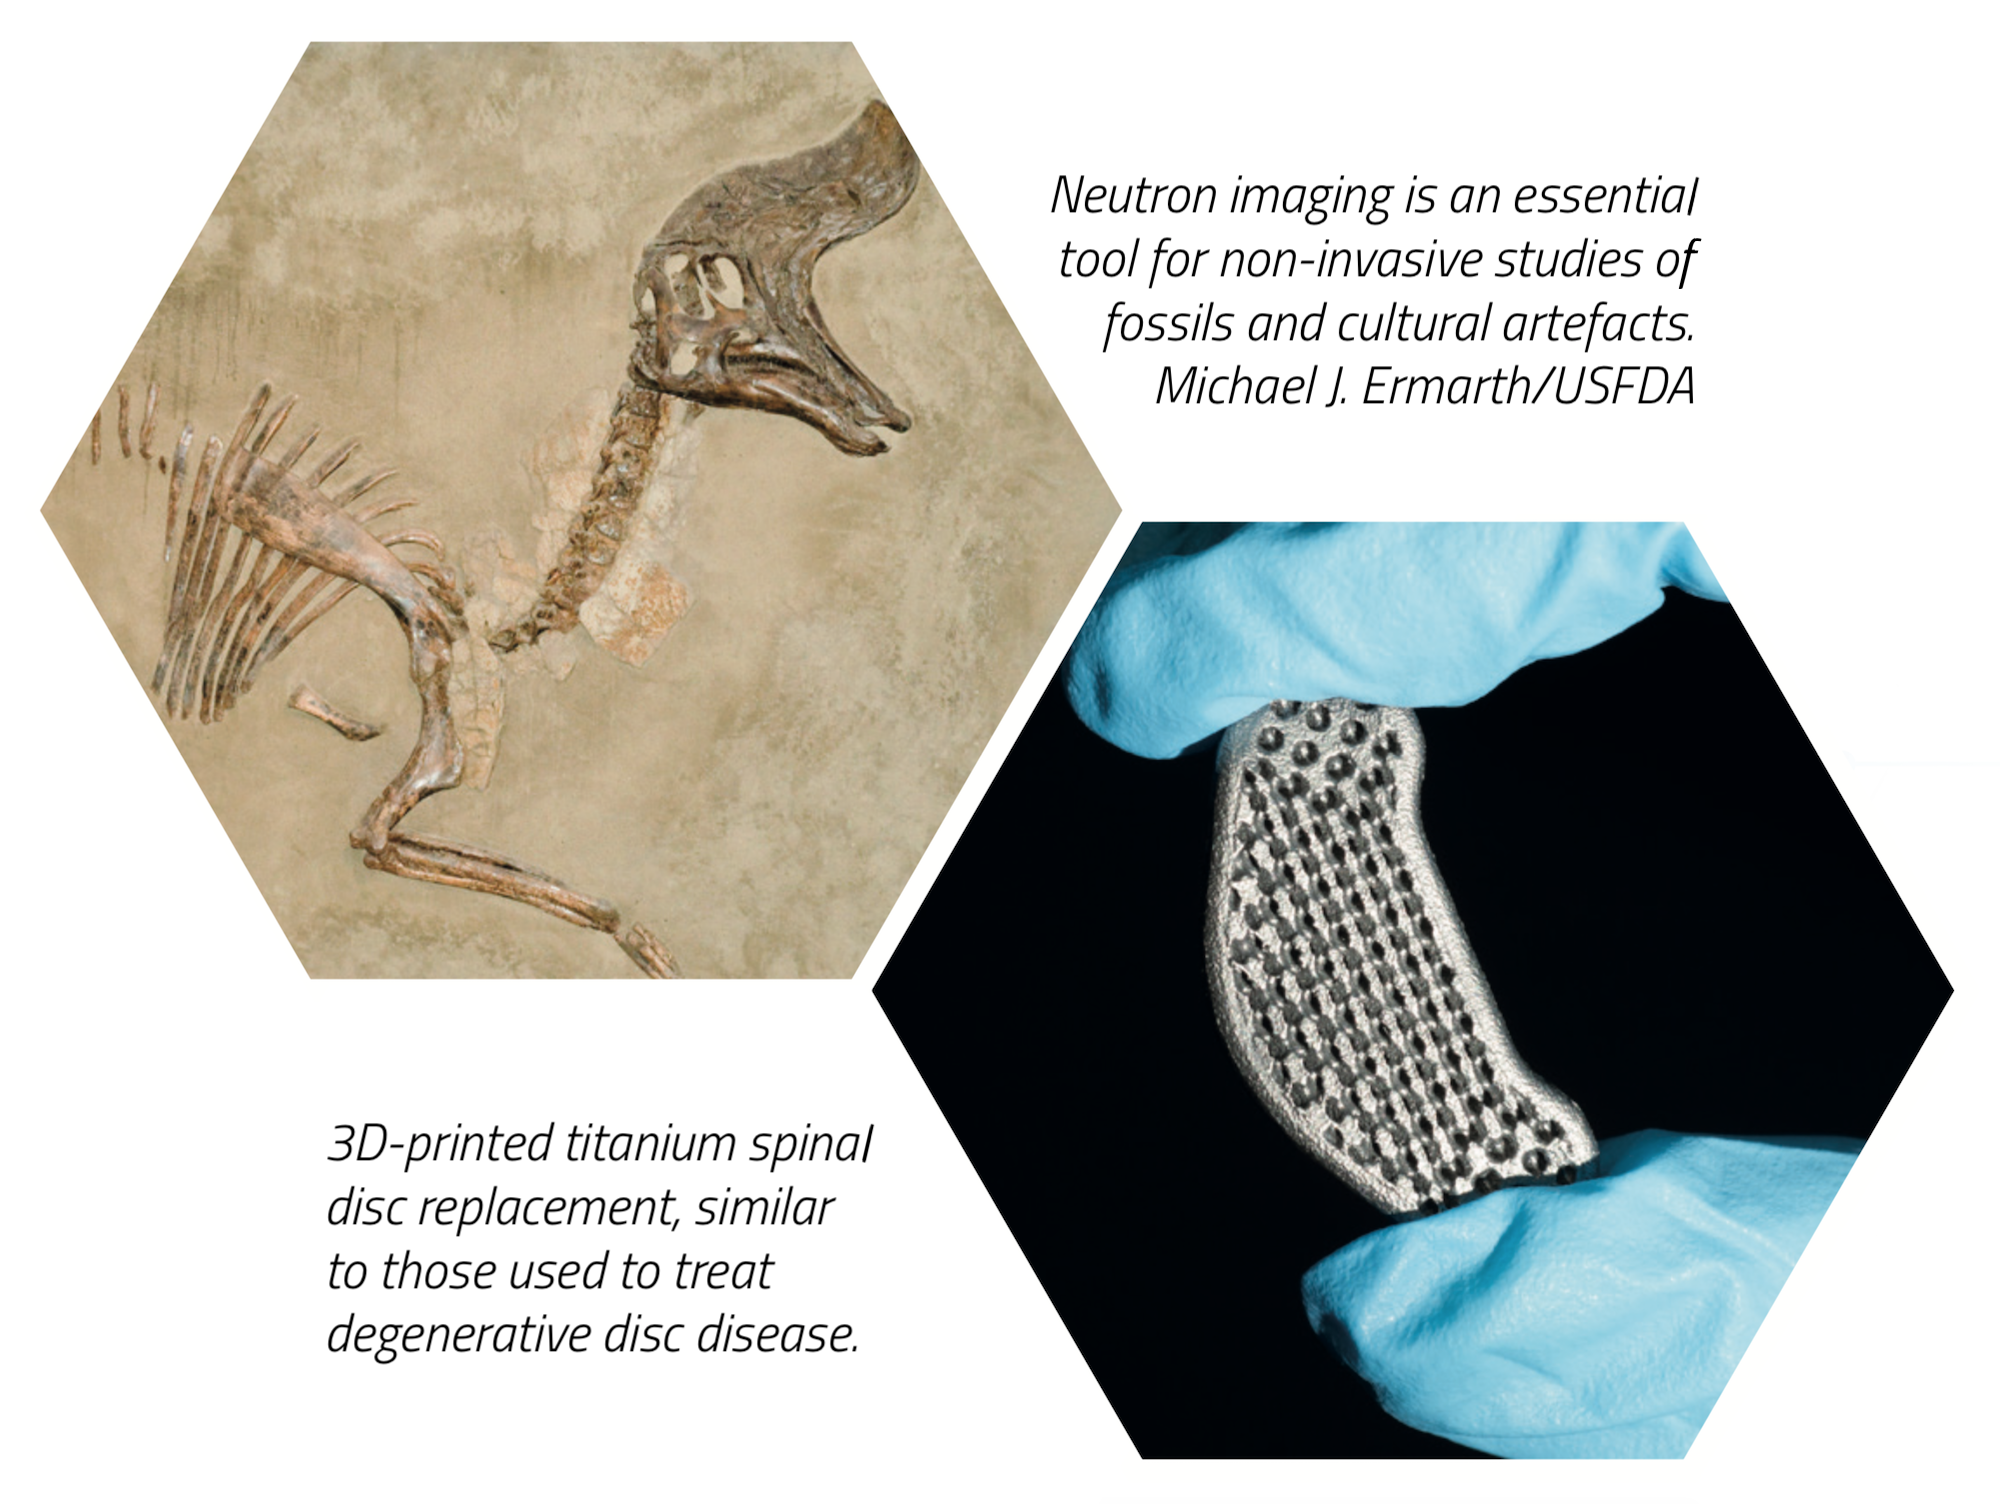 ODIN neutron imaging fossils and 3D-printed titanium spinal disc